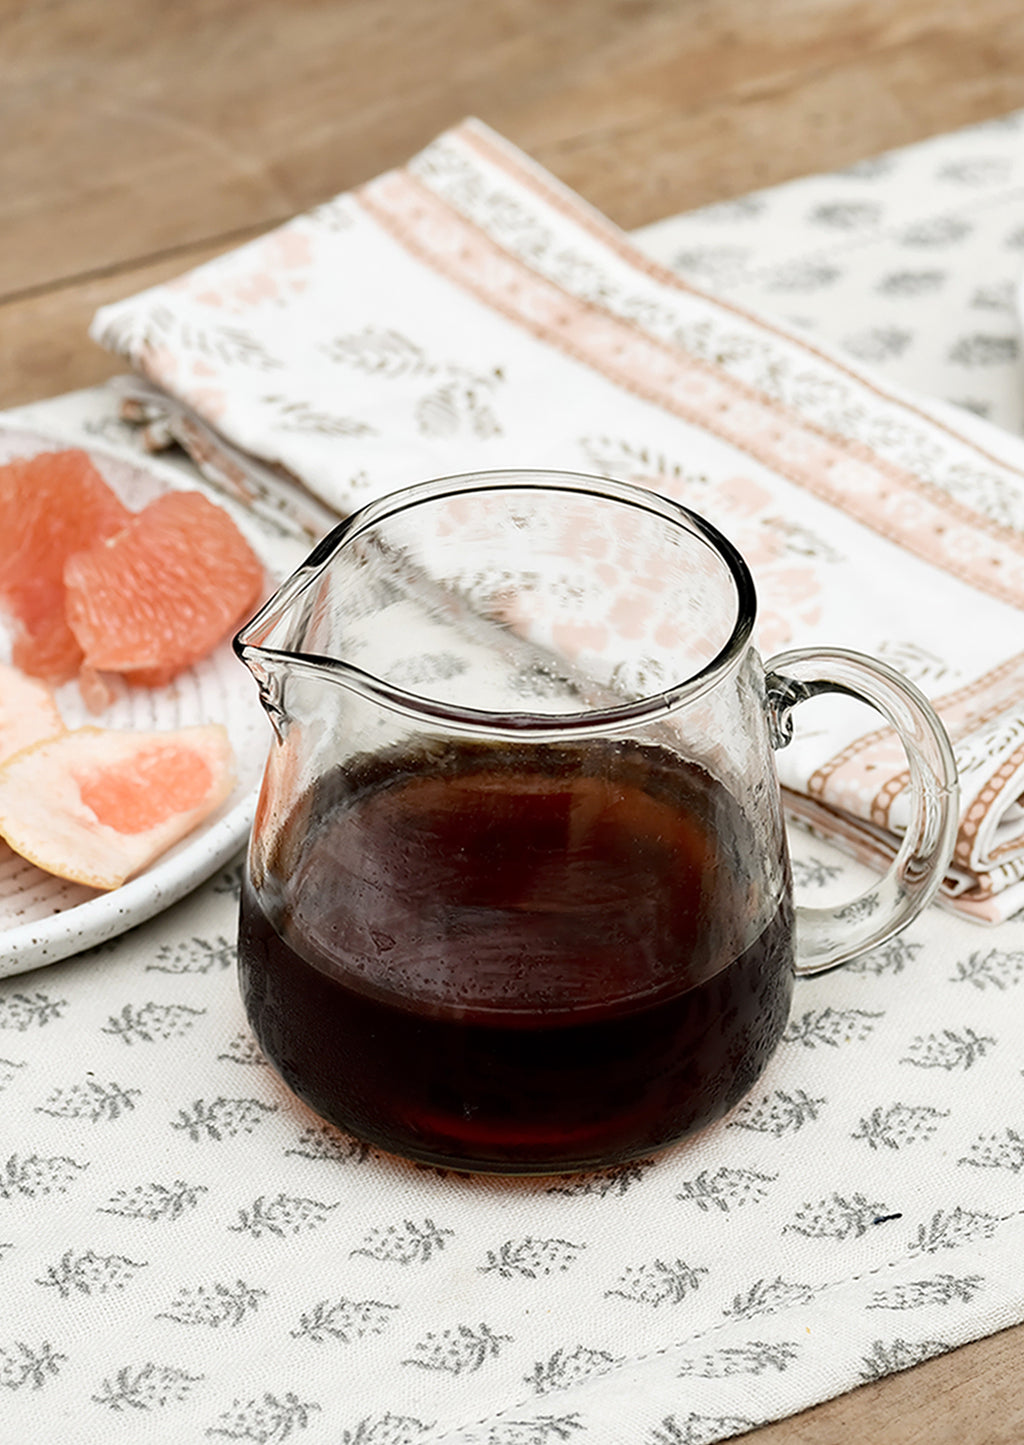 Small / 16 oz: A small glass pitcher on a table, filled with maple syrup.